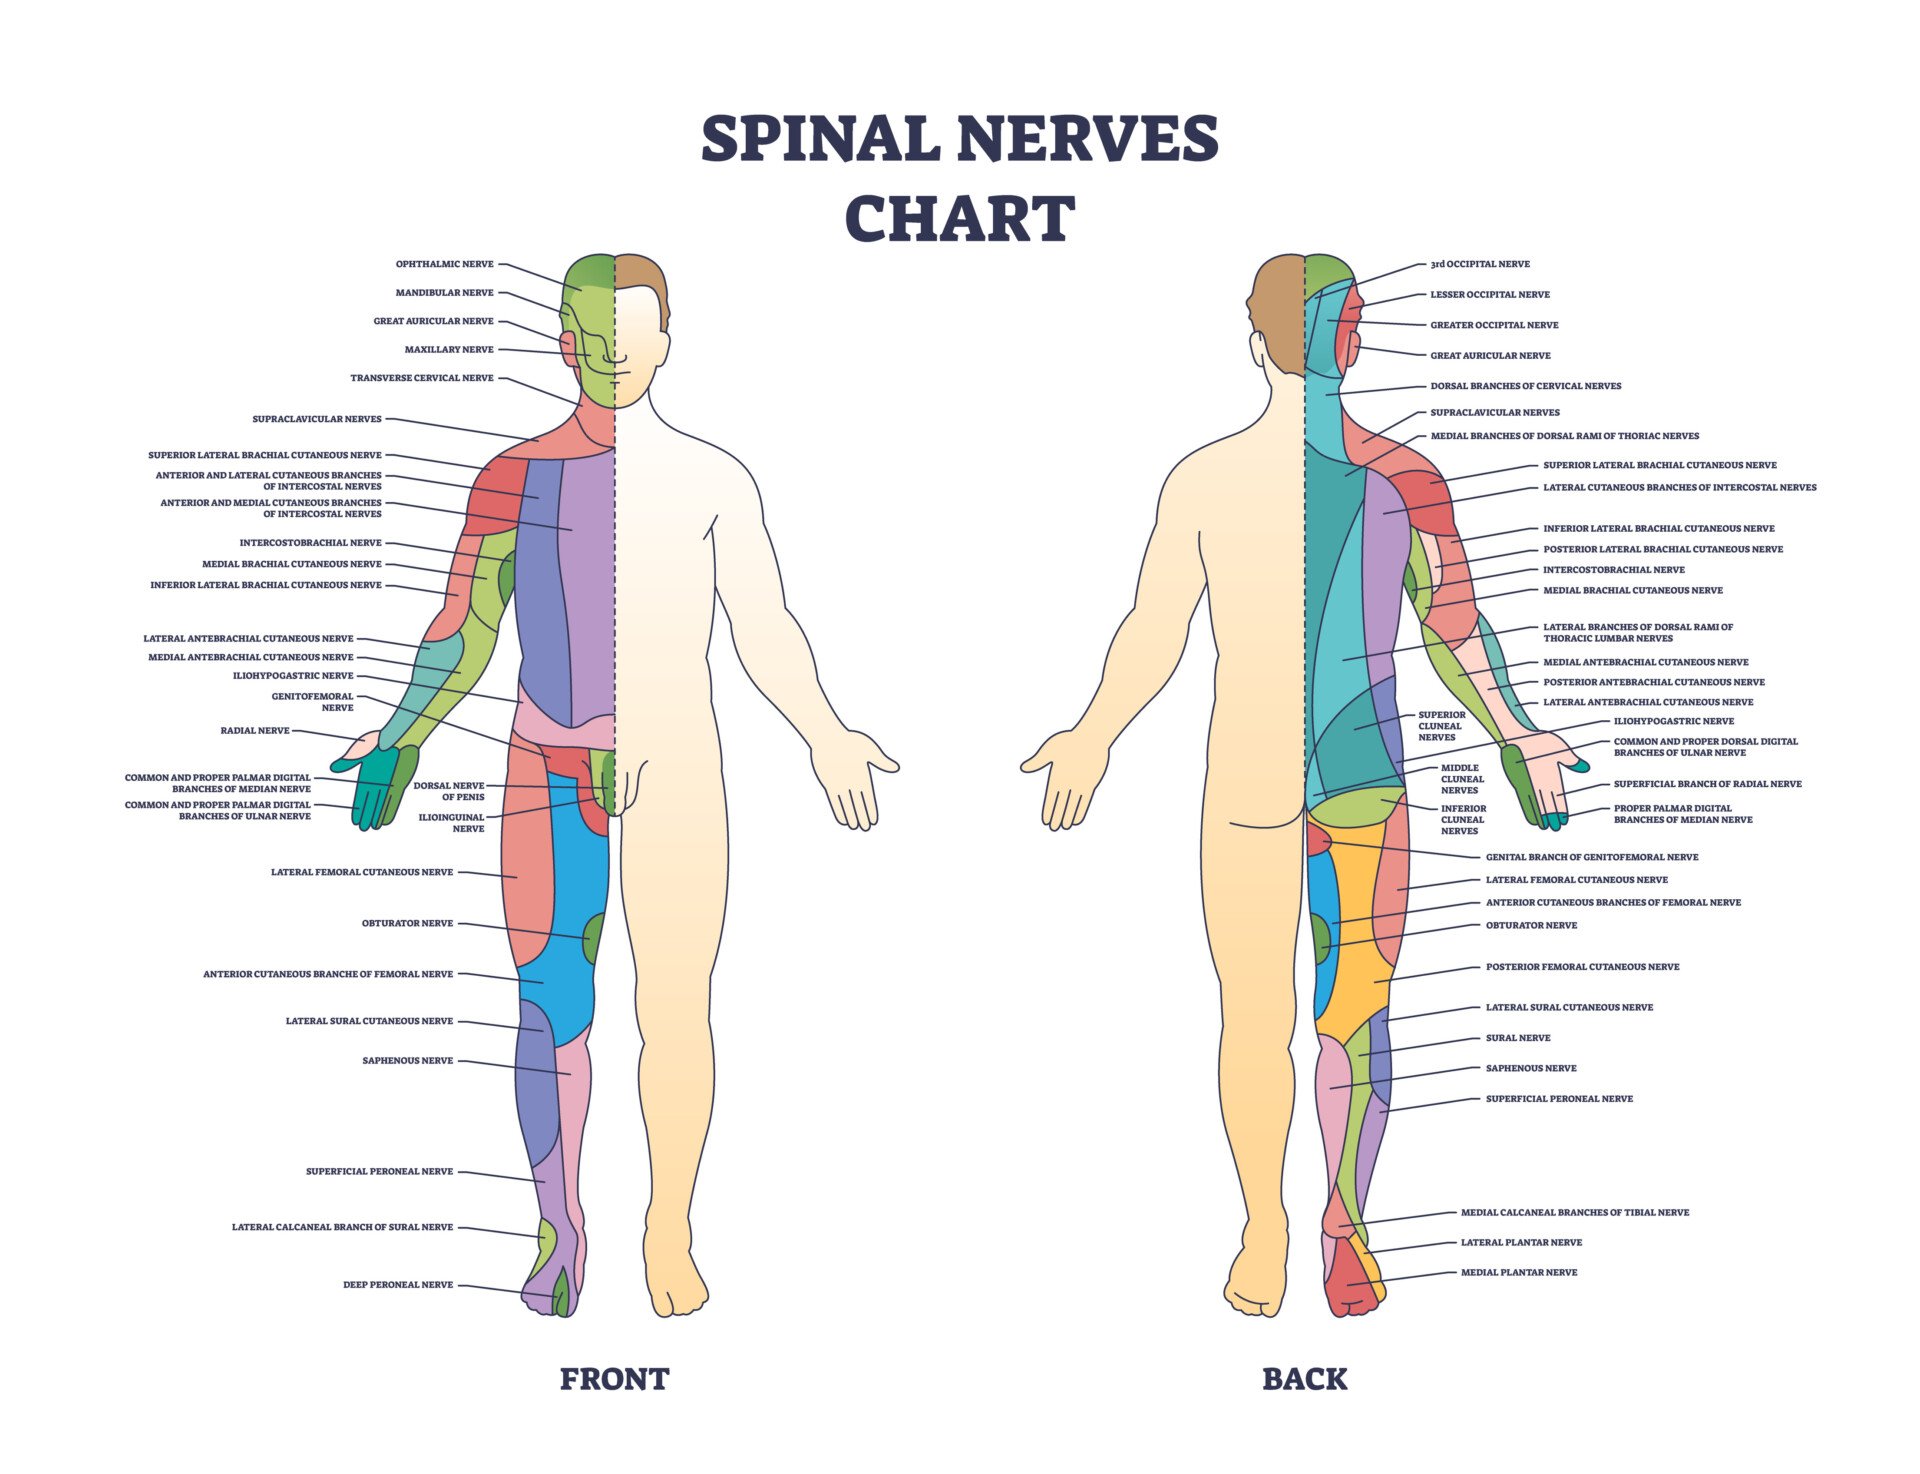 Spinal nerves chart and medical neural network in human body outline diagram. Labeled educational scheme with front and back neurology explanation